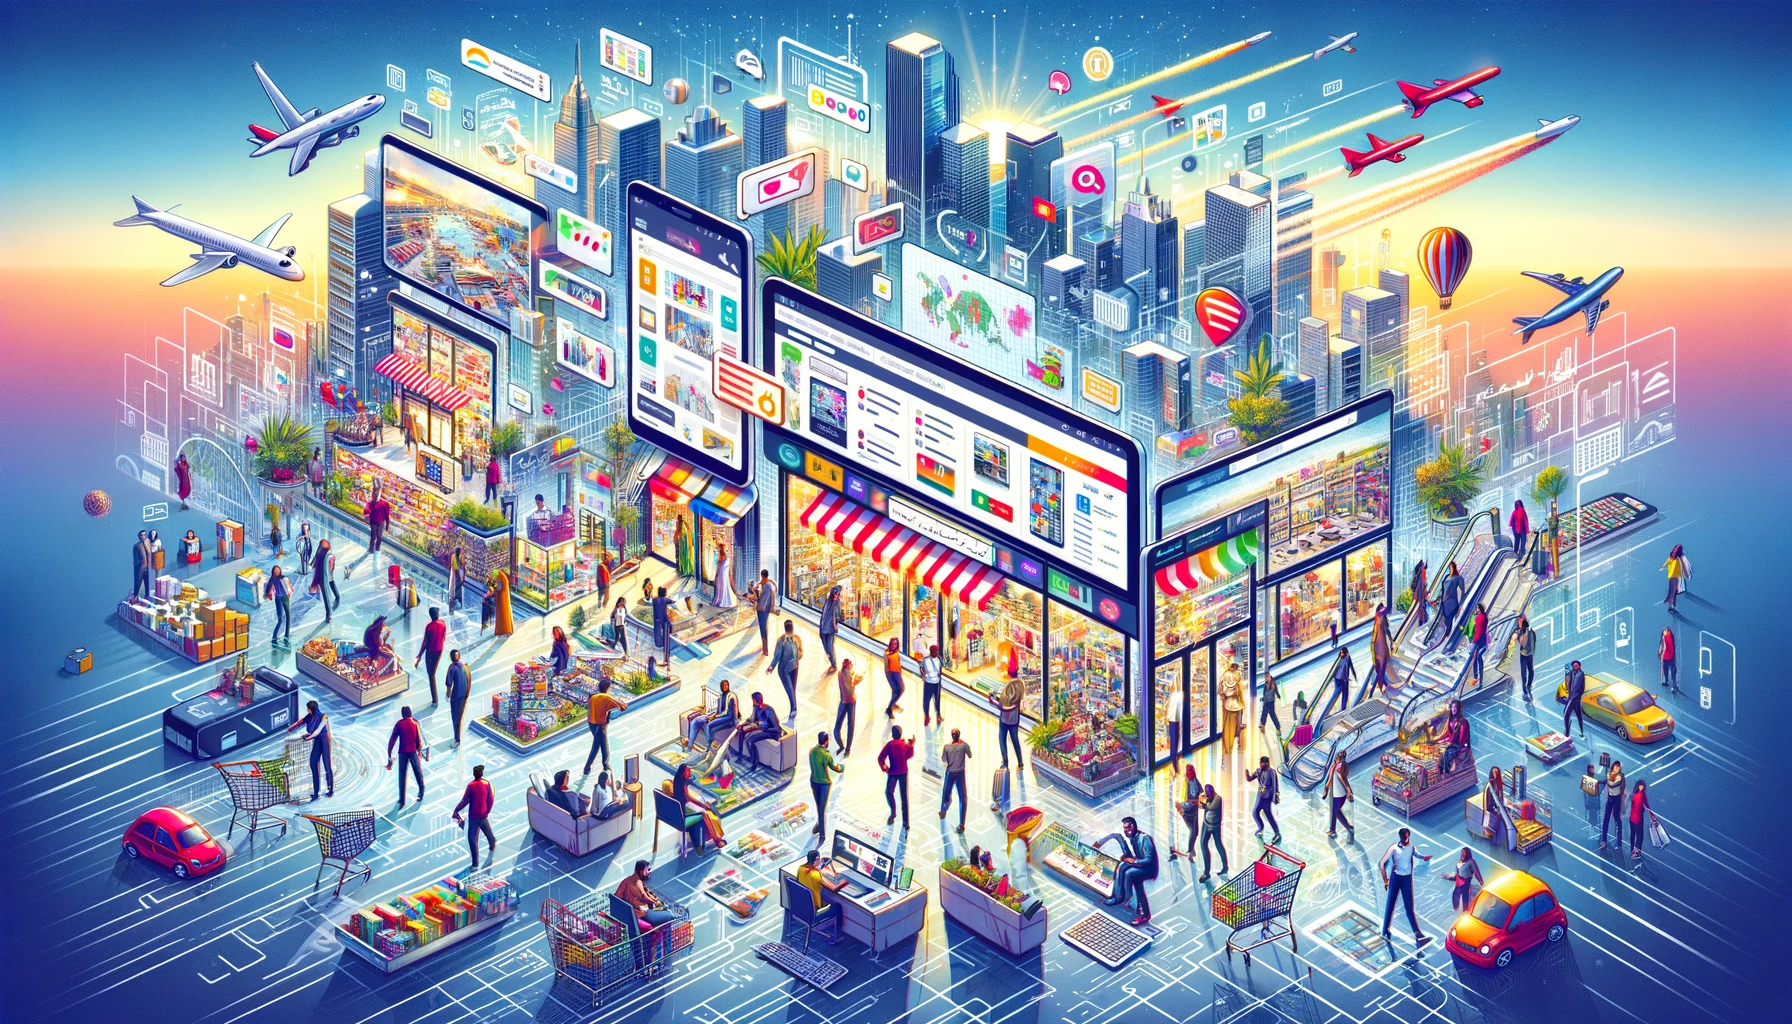 A-digital-illustration-for-an-article-about-e-commerce-in-Arabic.-The-image-should-depict-a-vibrant-and-bustling-online-shopping-environment